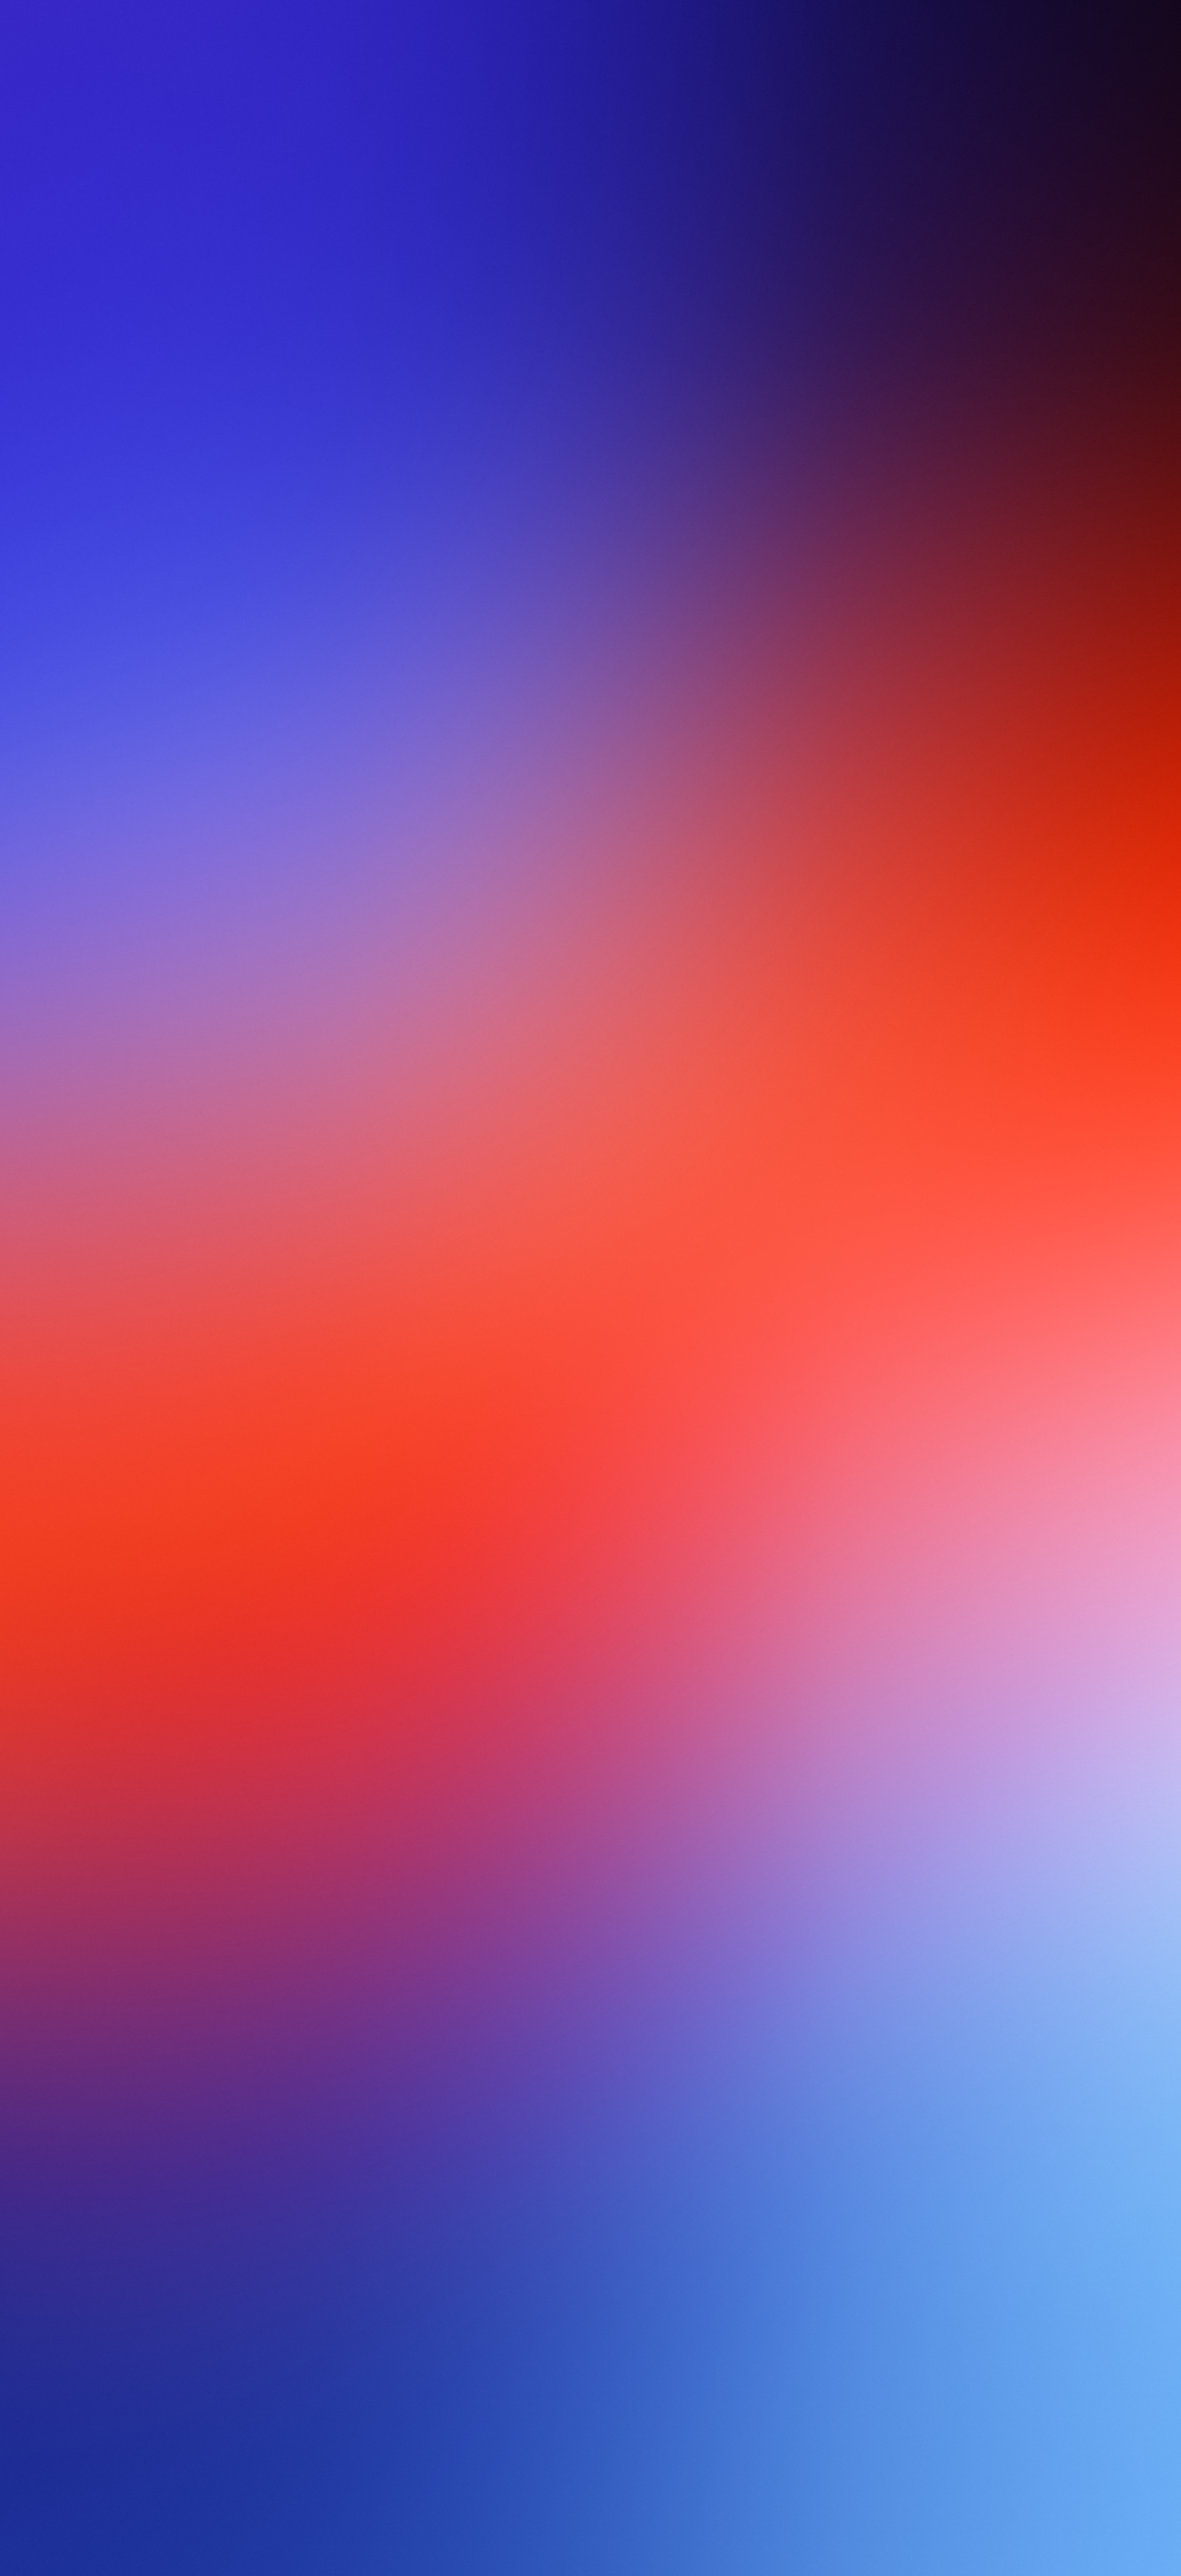 blue to red to blue gradient by evgeniyzemelko. Wallpaper iphone love, iPhone colors, Cool wallpaper for phones